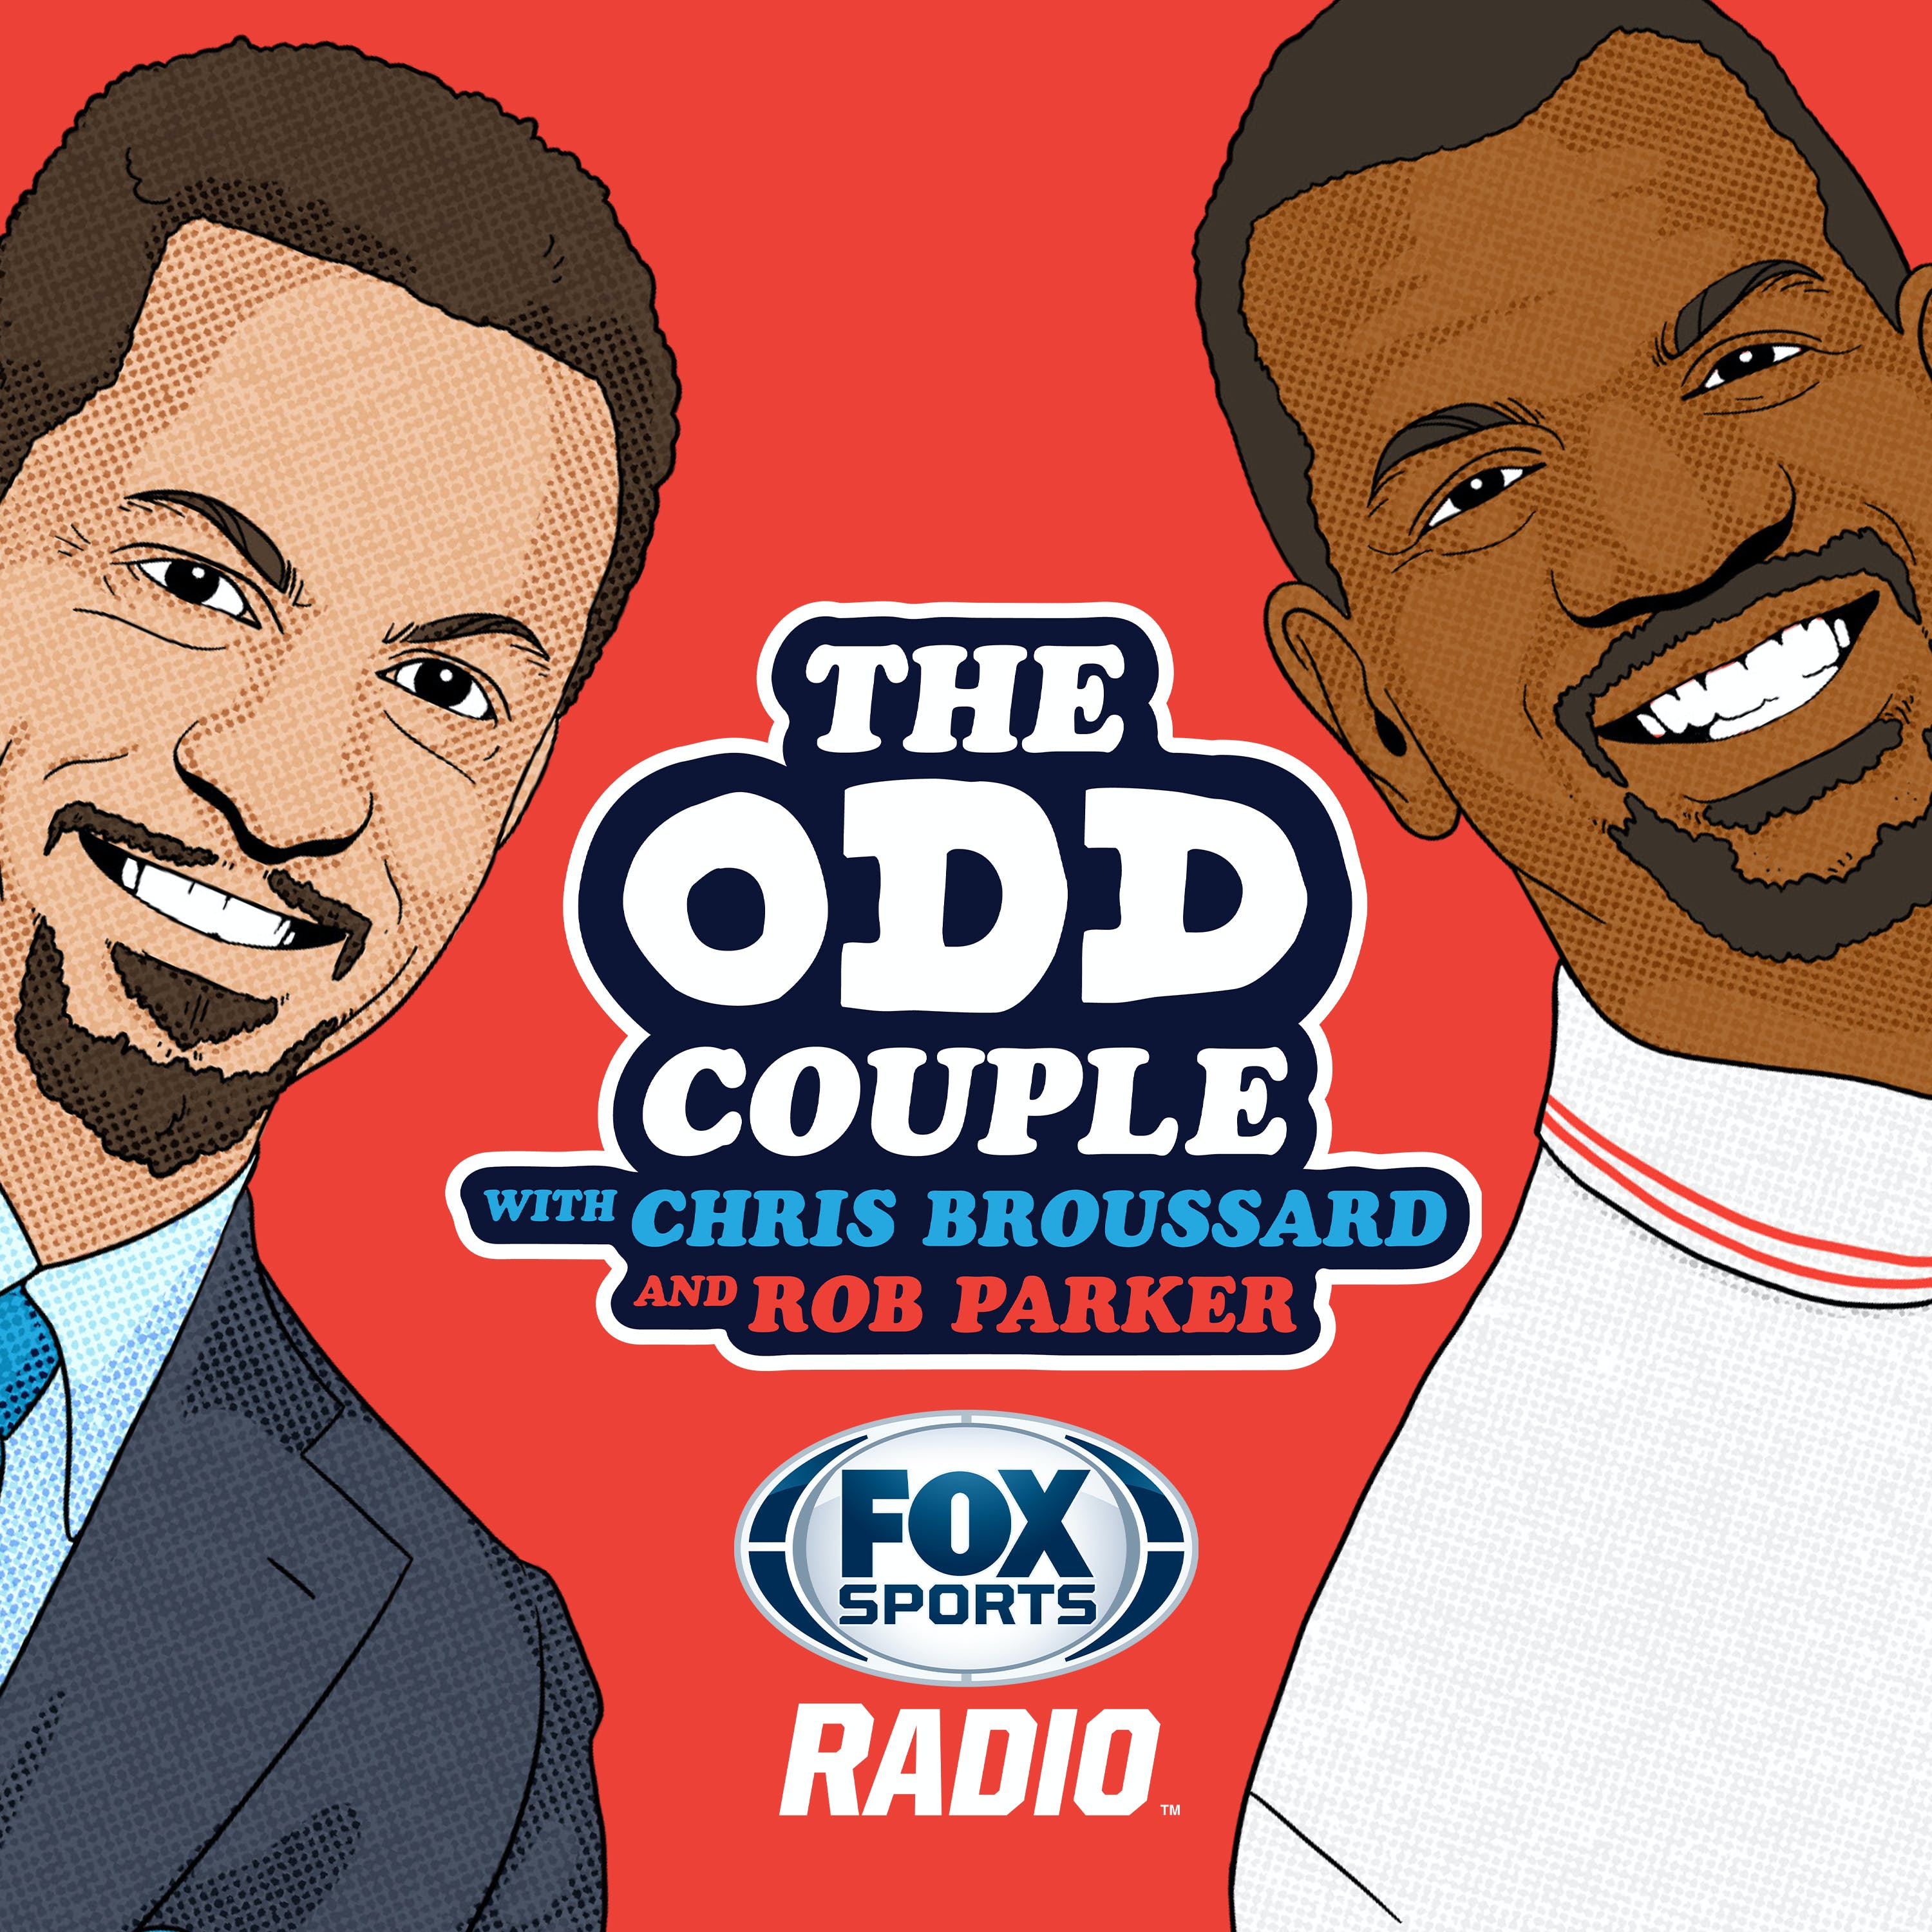 05/10/2021 - Best Of The Odd Couple